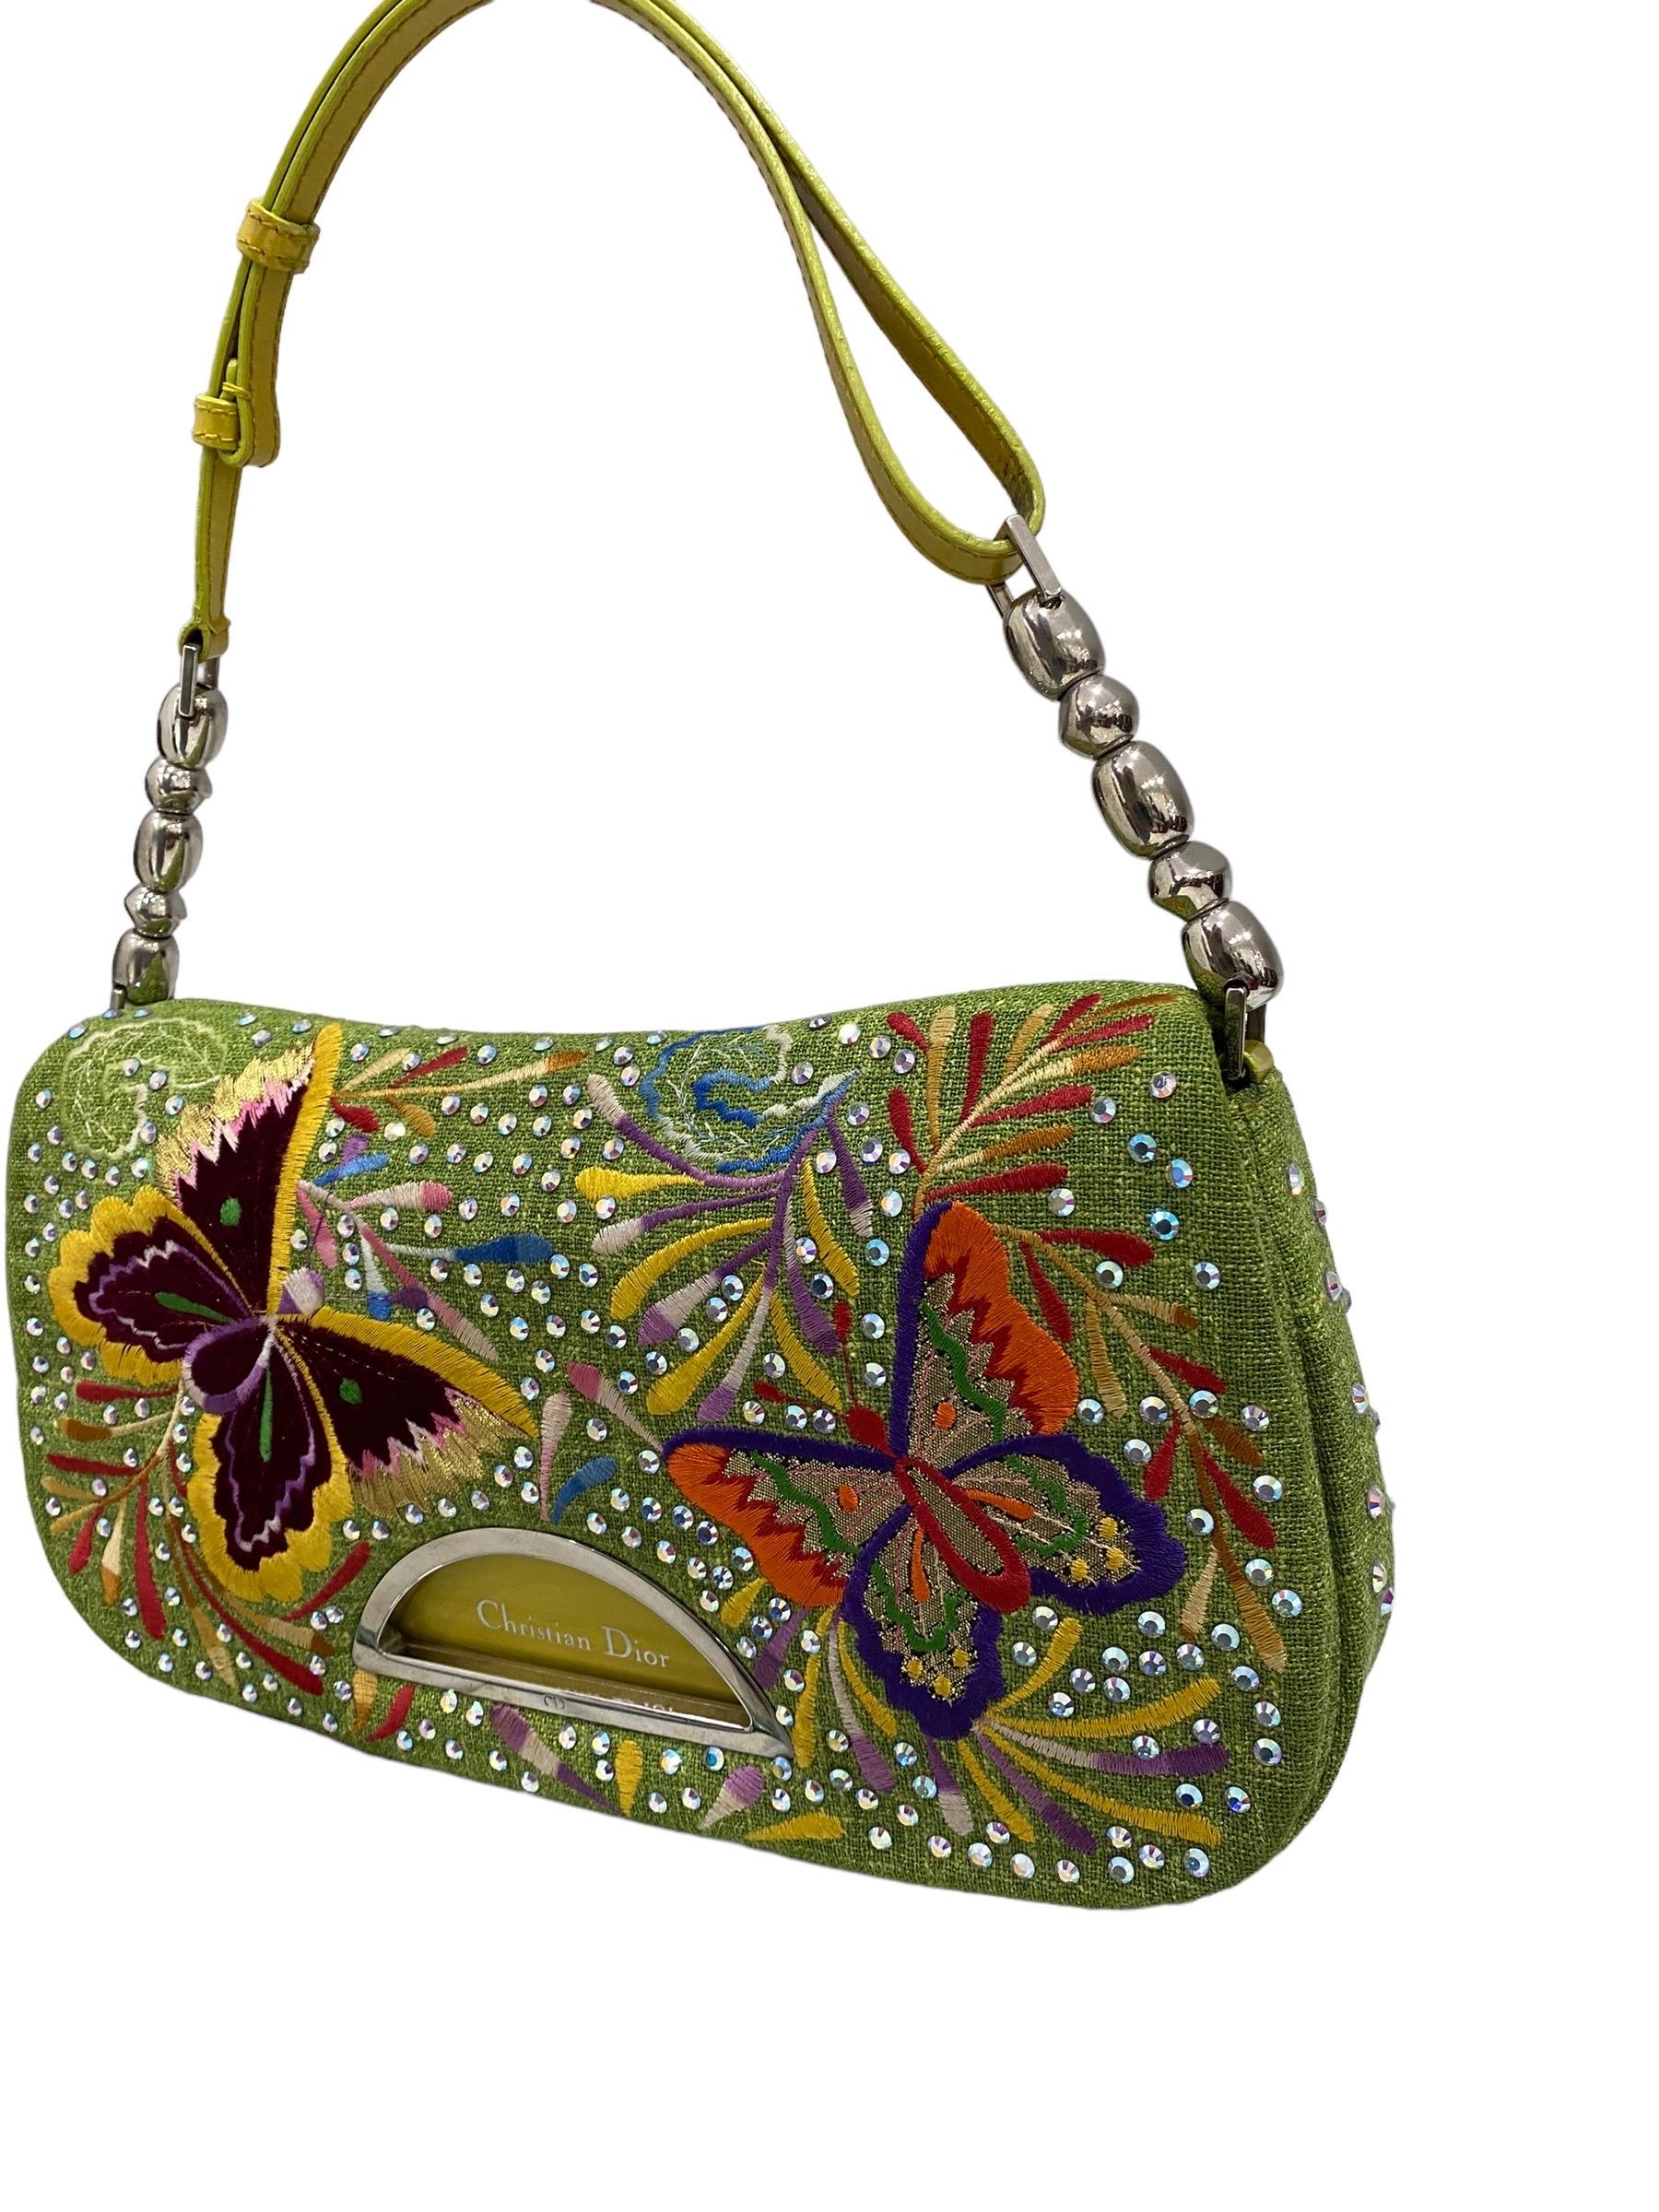 Dior bag, Butterfly Crystal Malice model, 2001 edition, made of green fabric with raised embroidery and rhinestones. Equipped with a flap with magnetic closure, internally lined in green satin, roomy for the essentials. Equipped with an adjustable